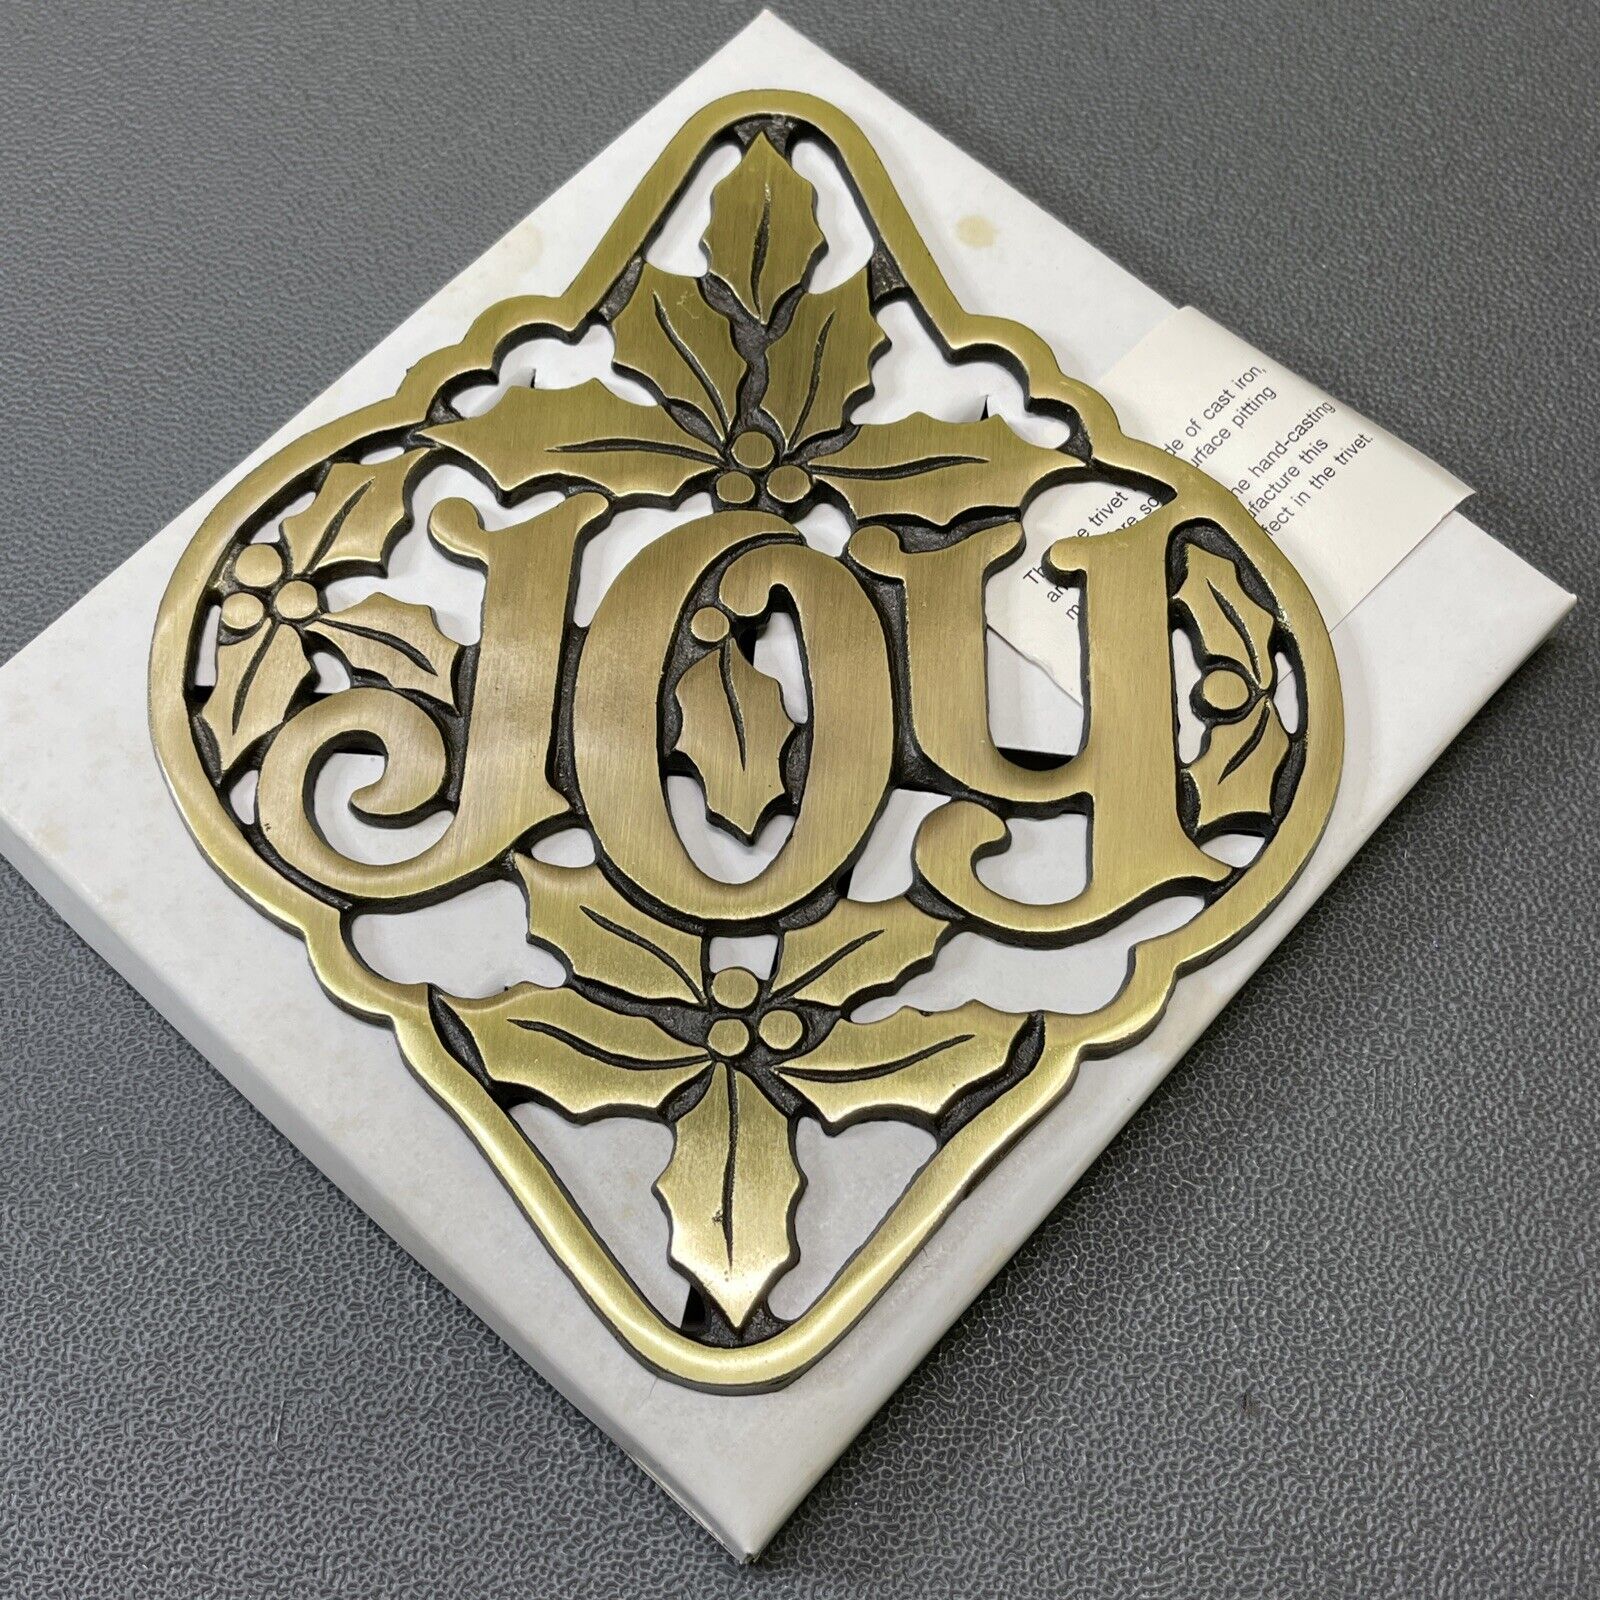 Vintage Avon Cast Iron Trivet Logo Joy with Holly Leaves Gift Collection Rare